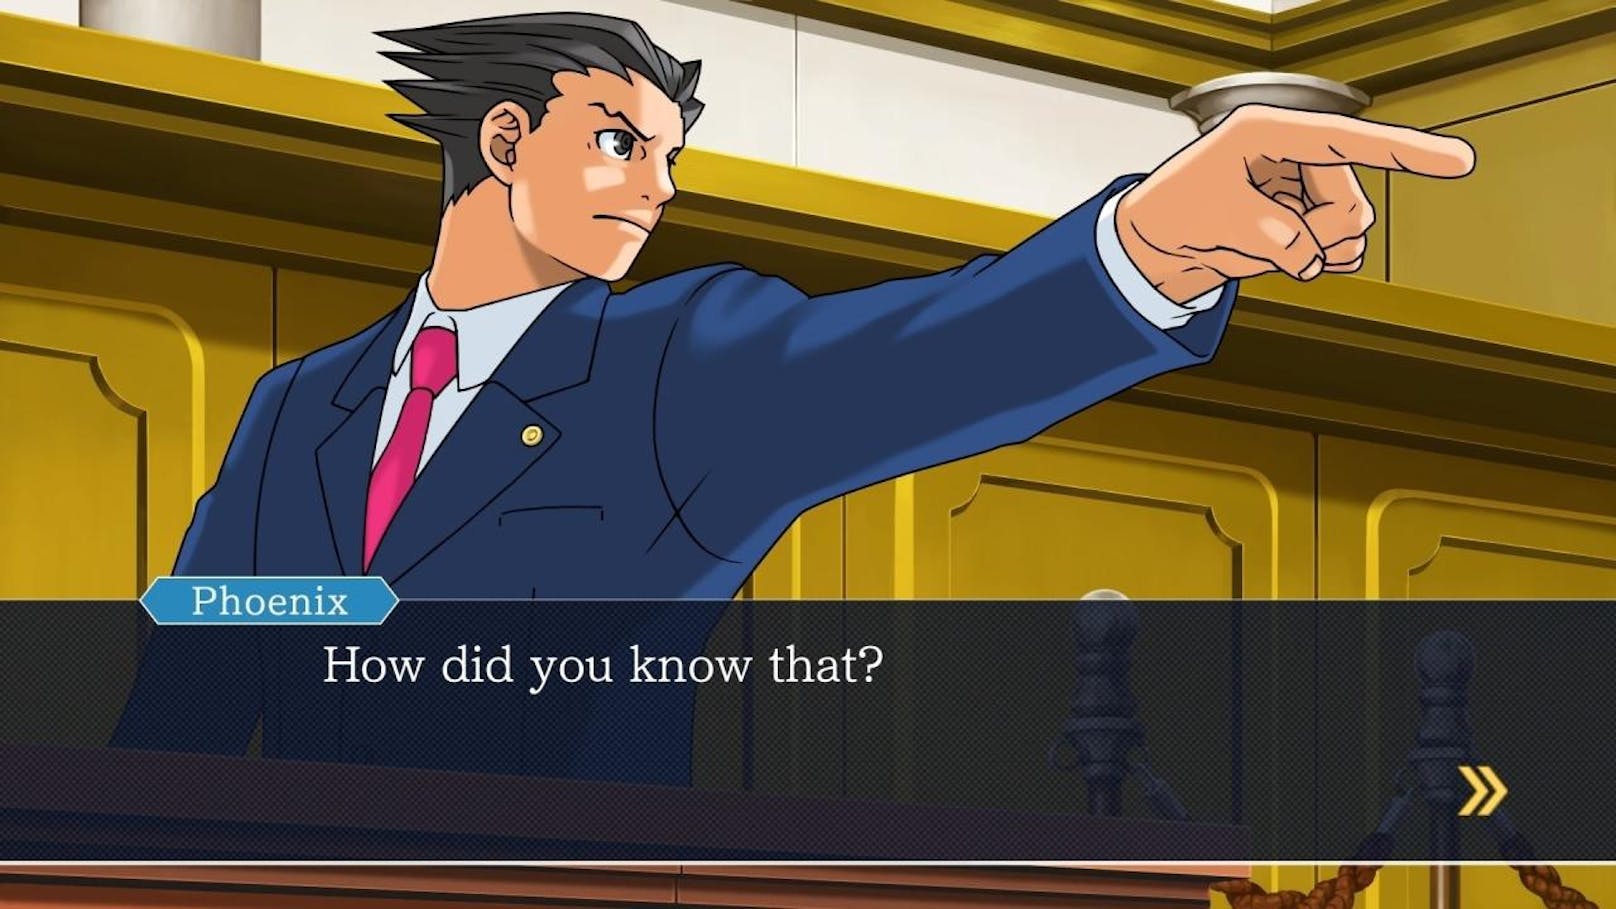  <a href="https://www.heute.at/digital/games/story/Phoenix-Wright--Ace-Attorney-Trilogy-Test-Einspruch-41004675" target="_blank">Phoenix Wright: Ace Attorney Trilogy</a>